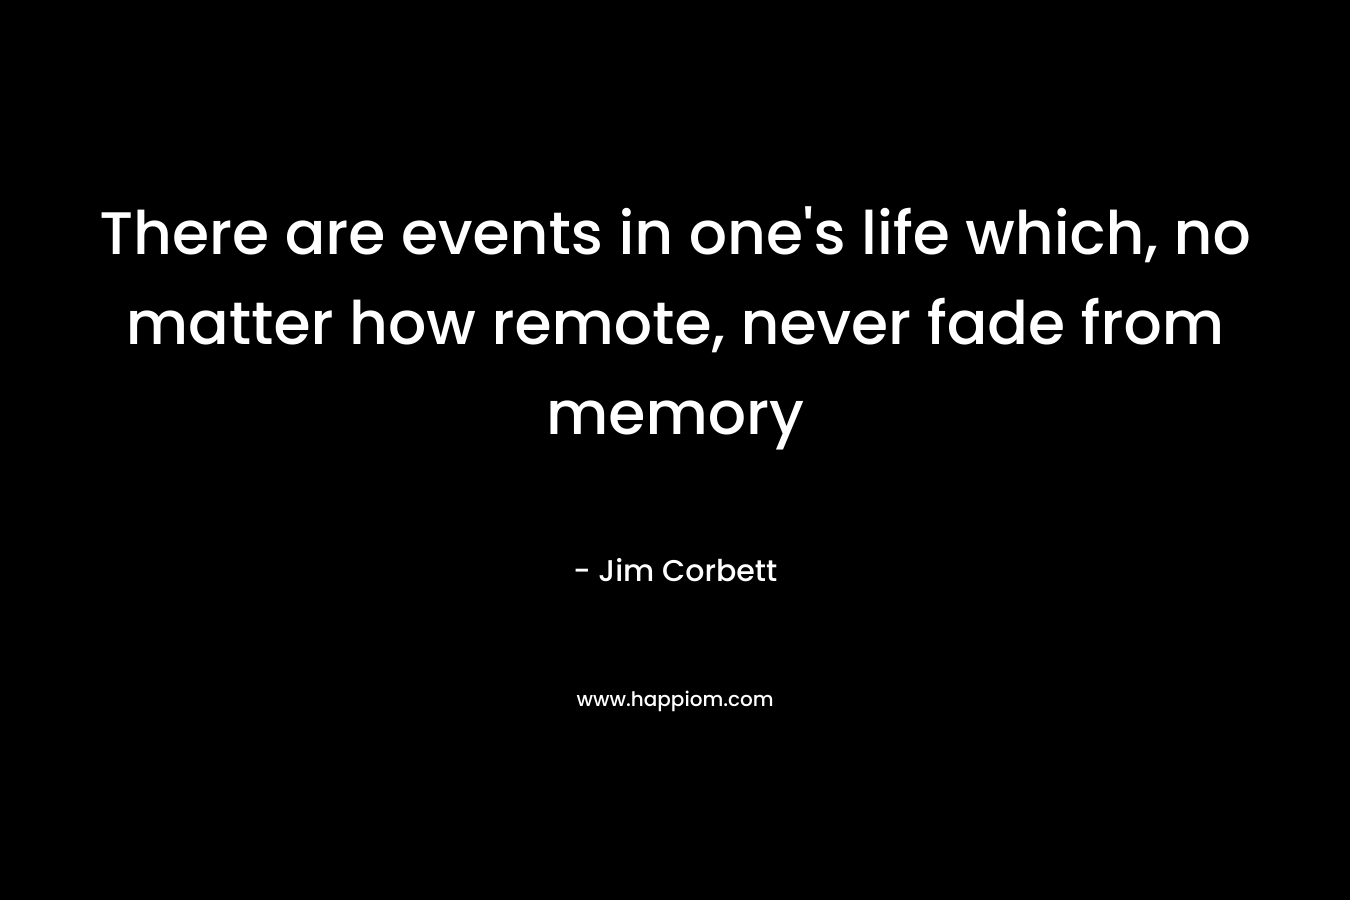 There are events in one's life which, no matter how remote, never fade from memory